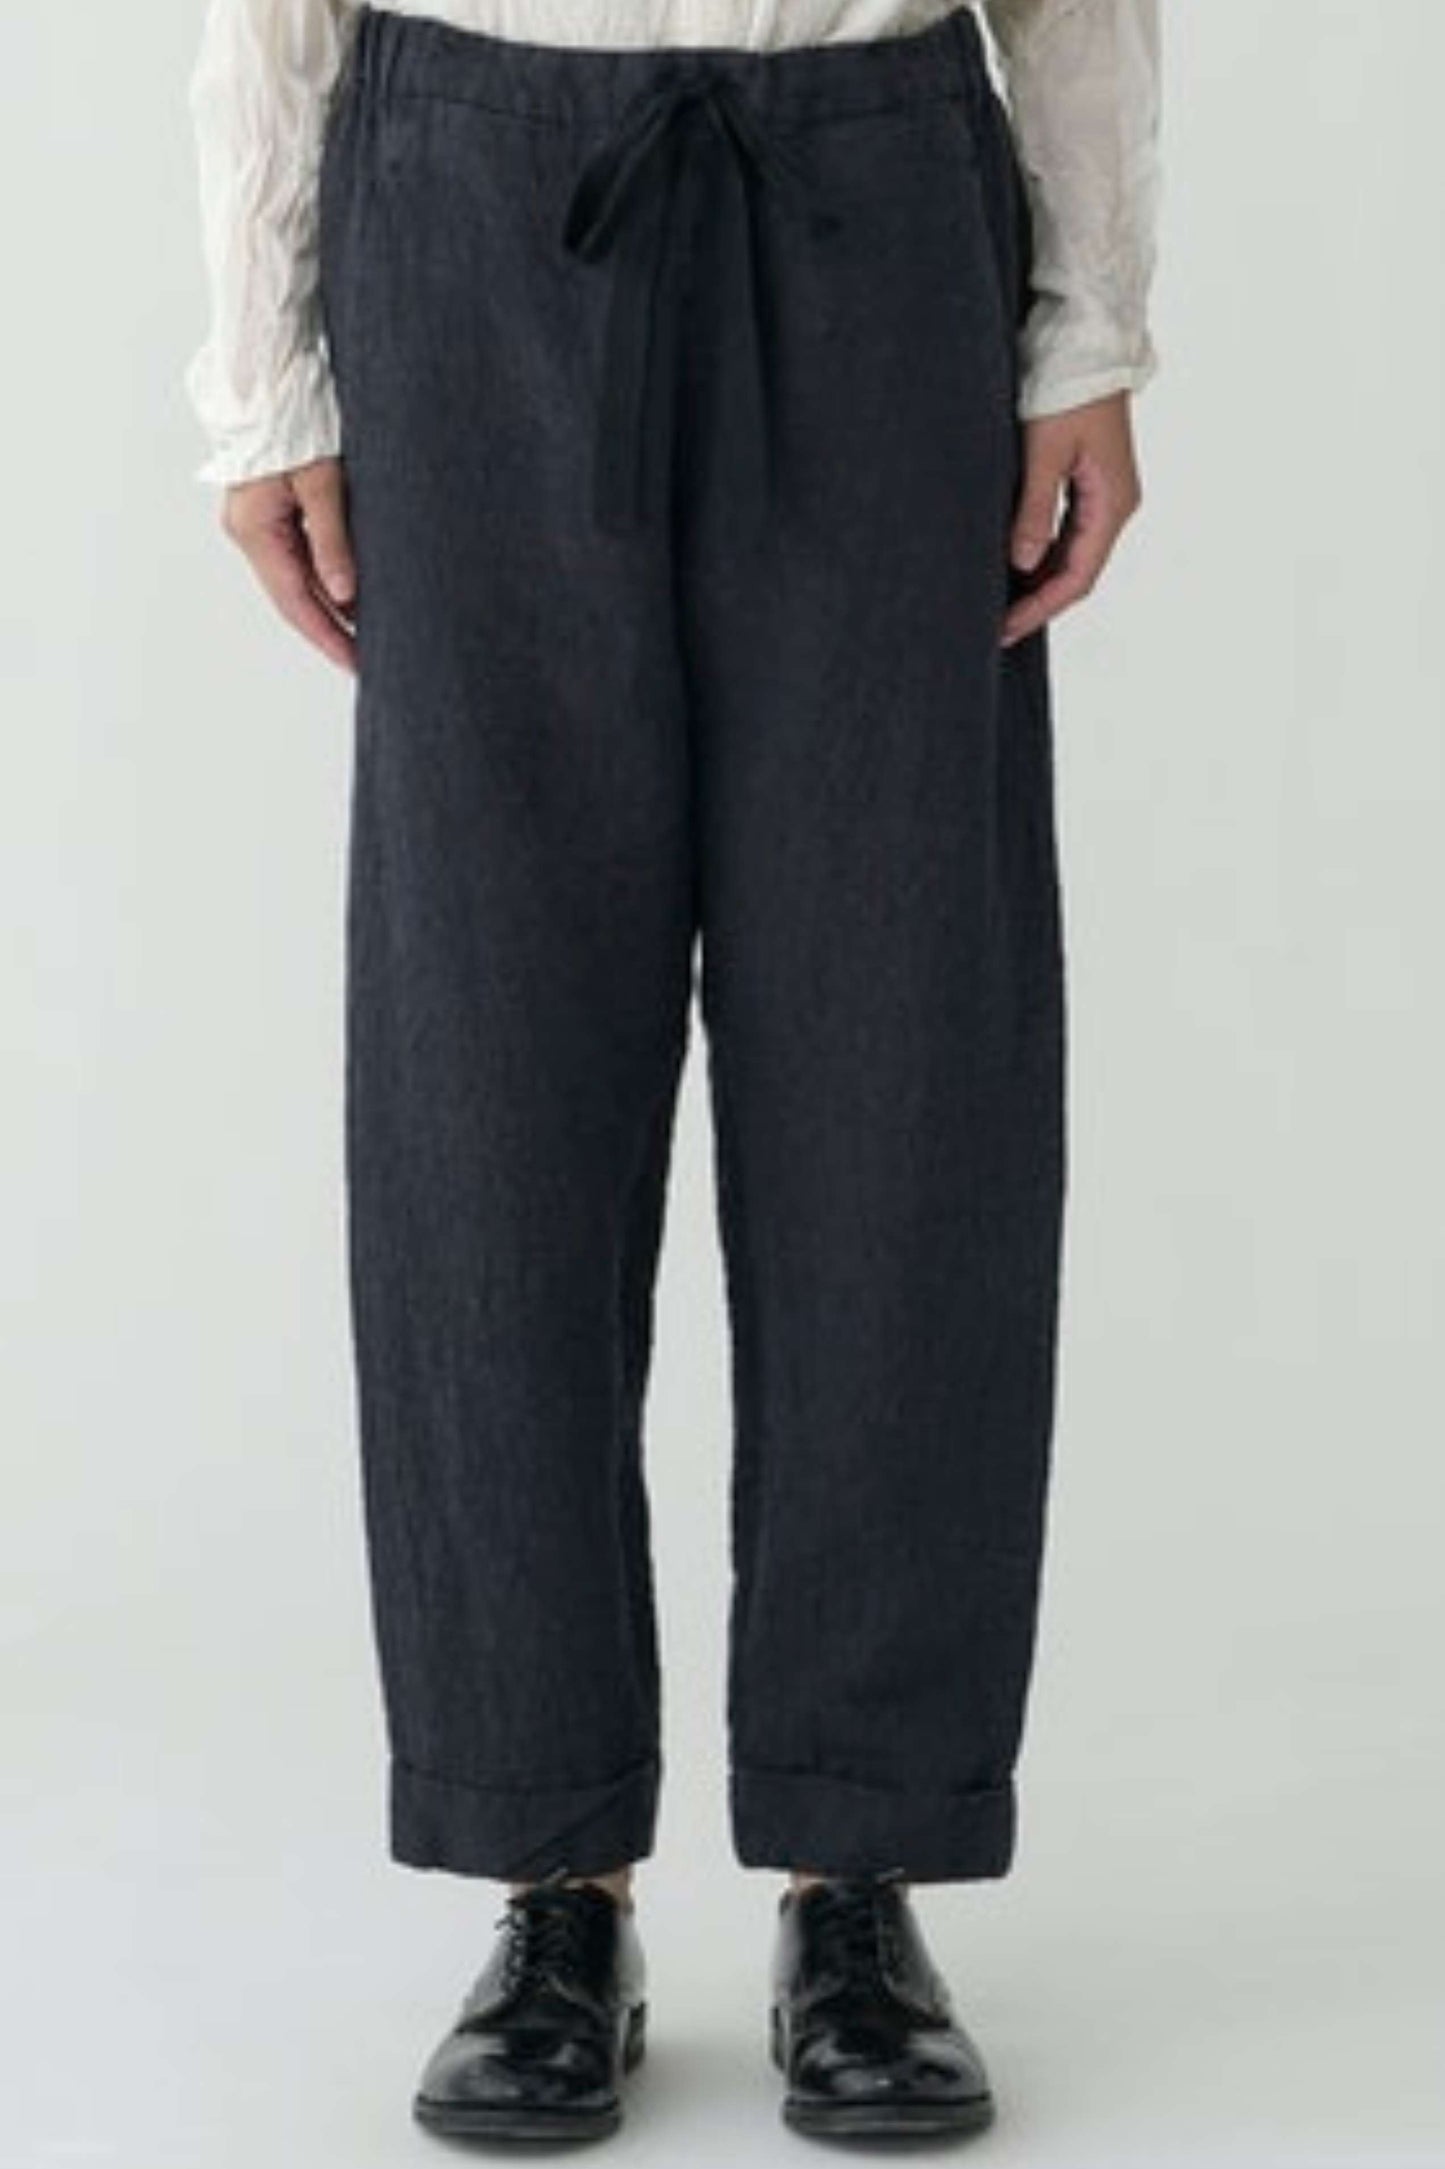 HOUNDSTOOTH CUFFED PANTS